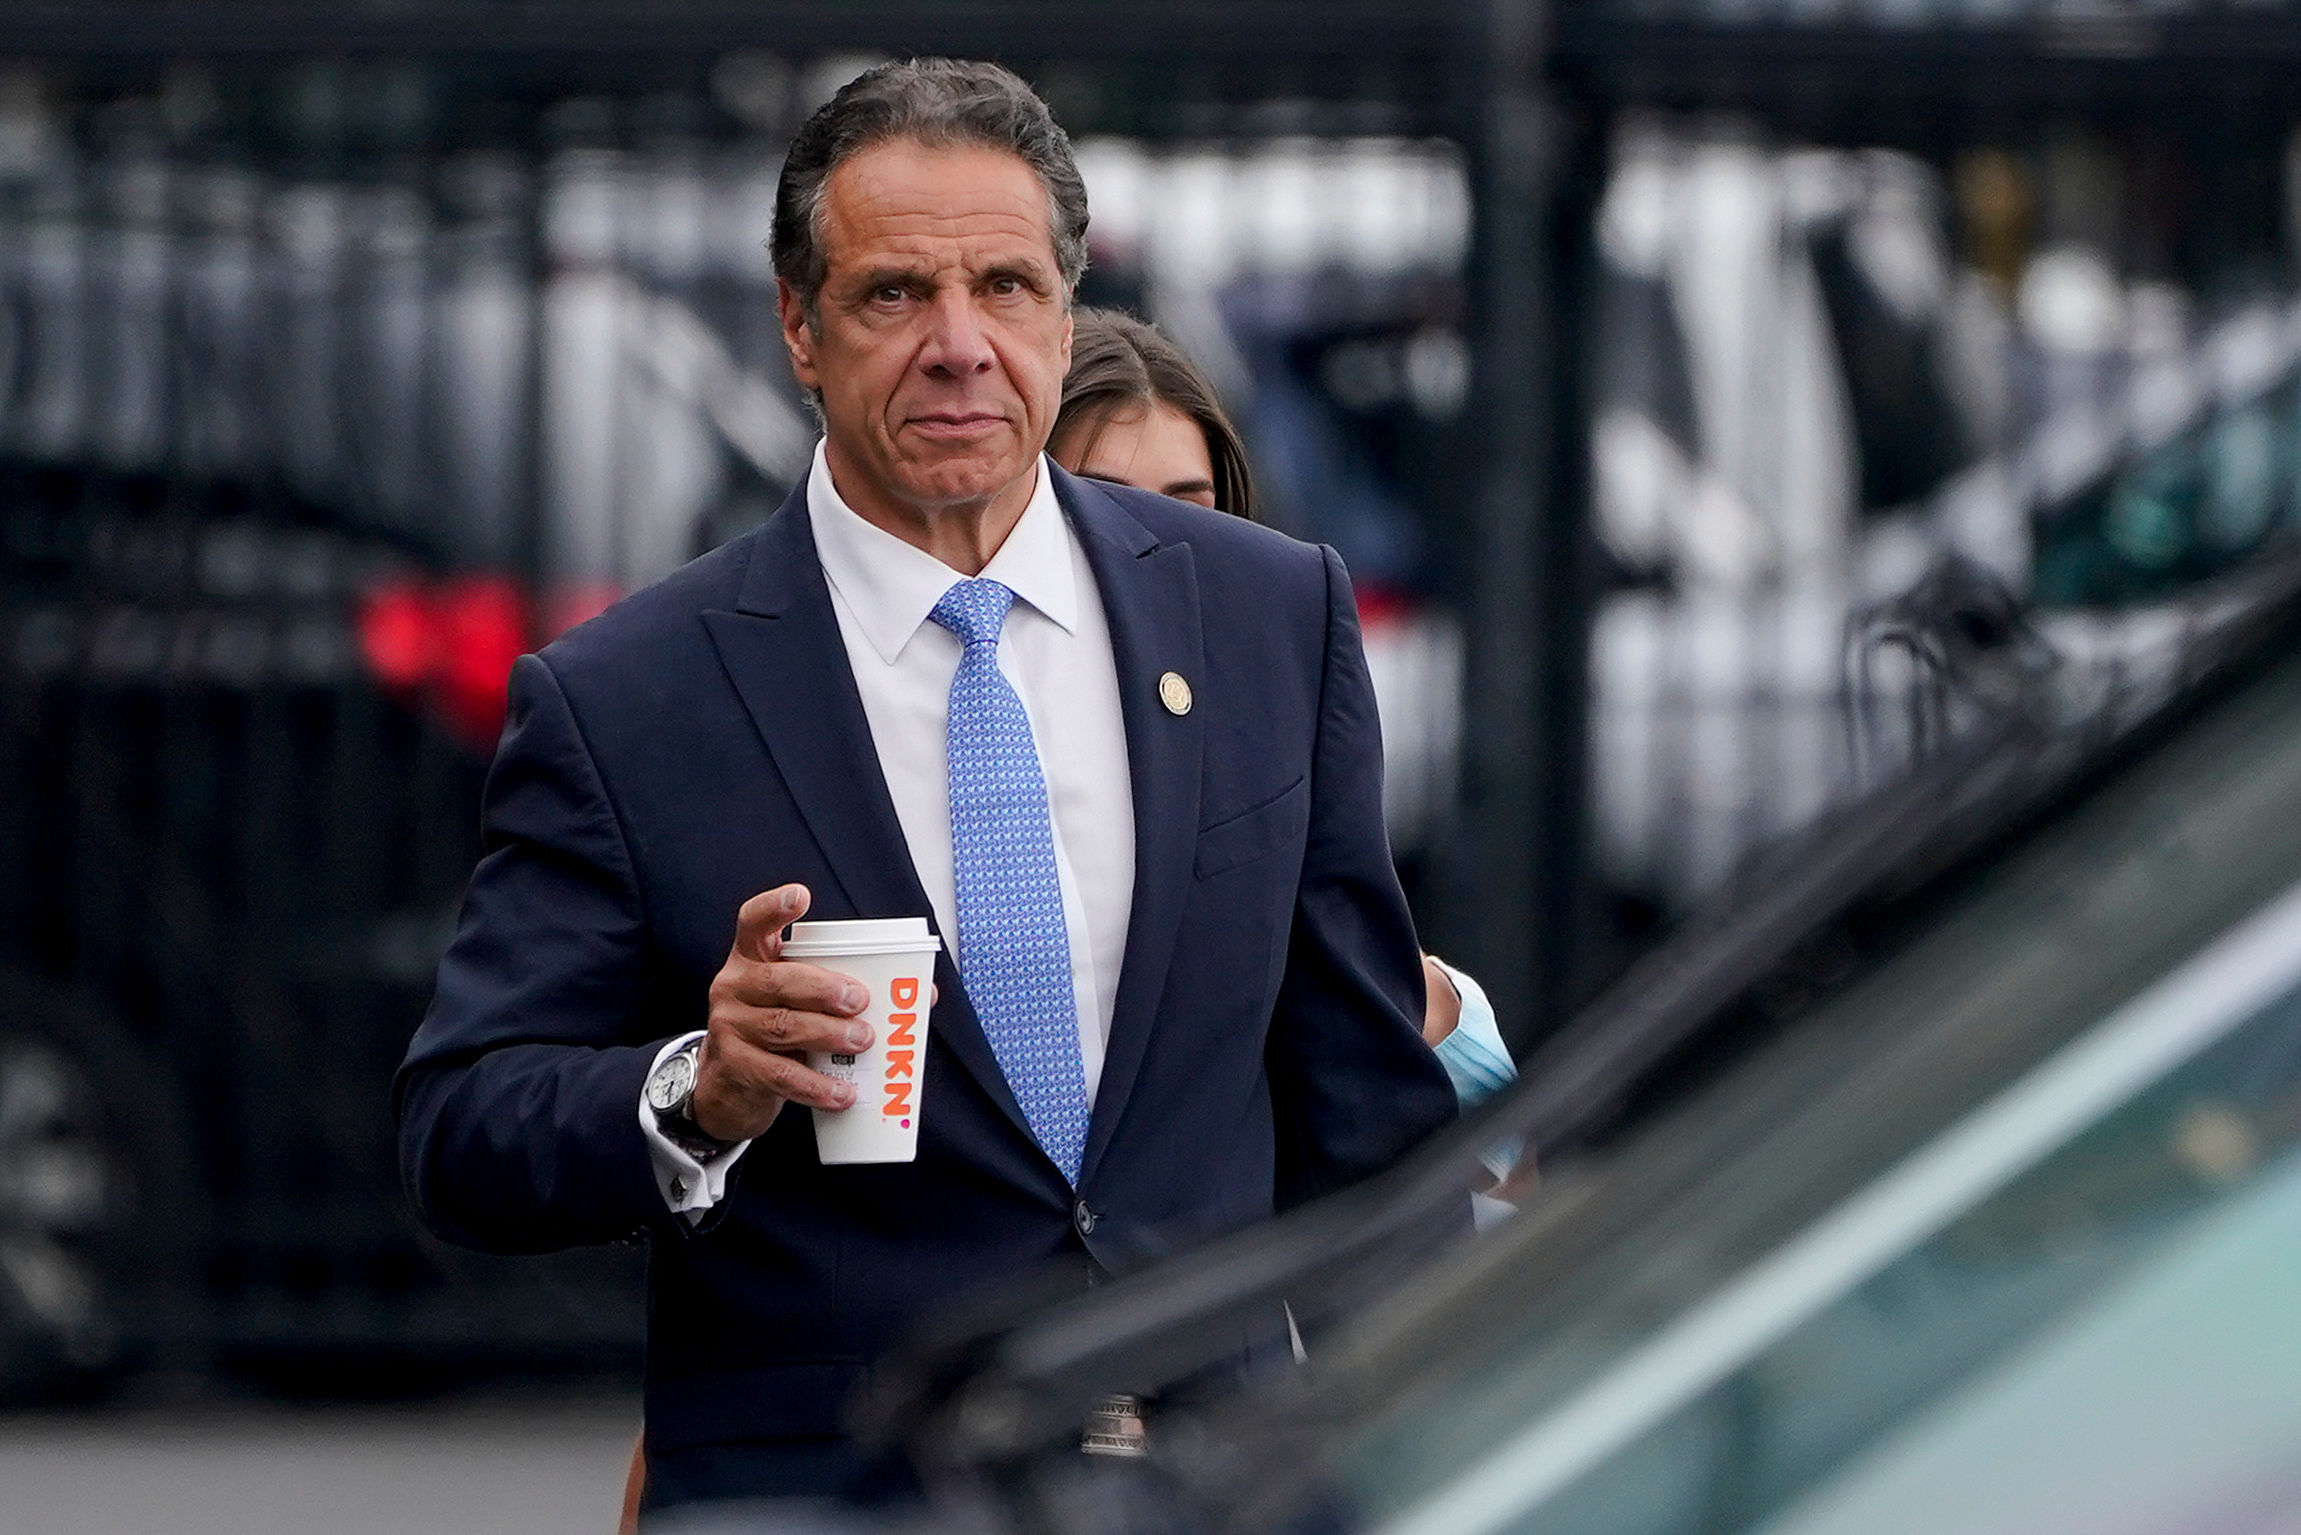 Prosecutor drops groping charge against former New York Gov. Andrew Cuomo